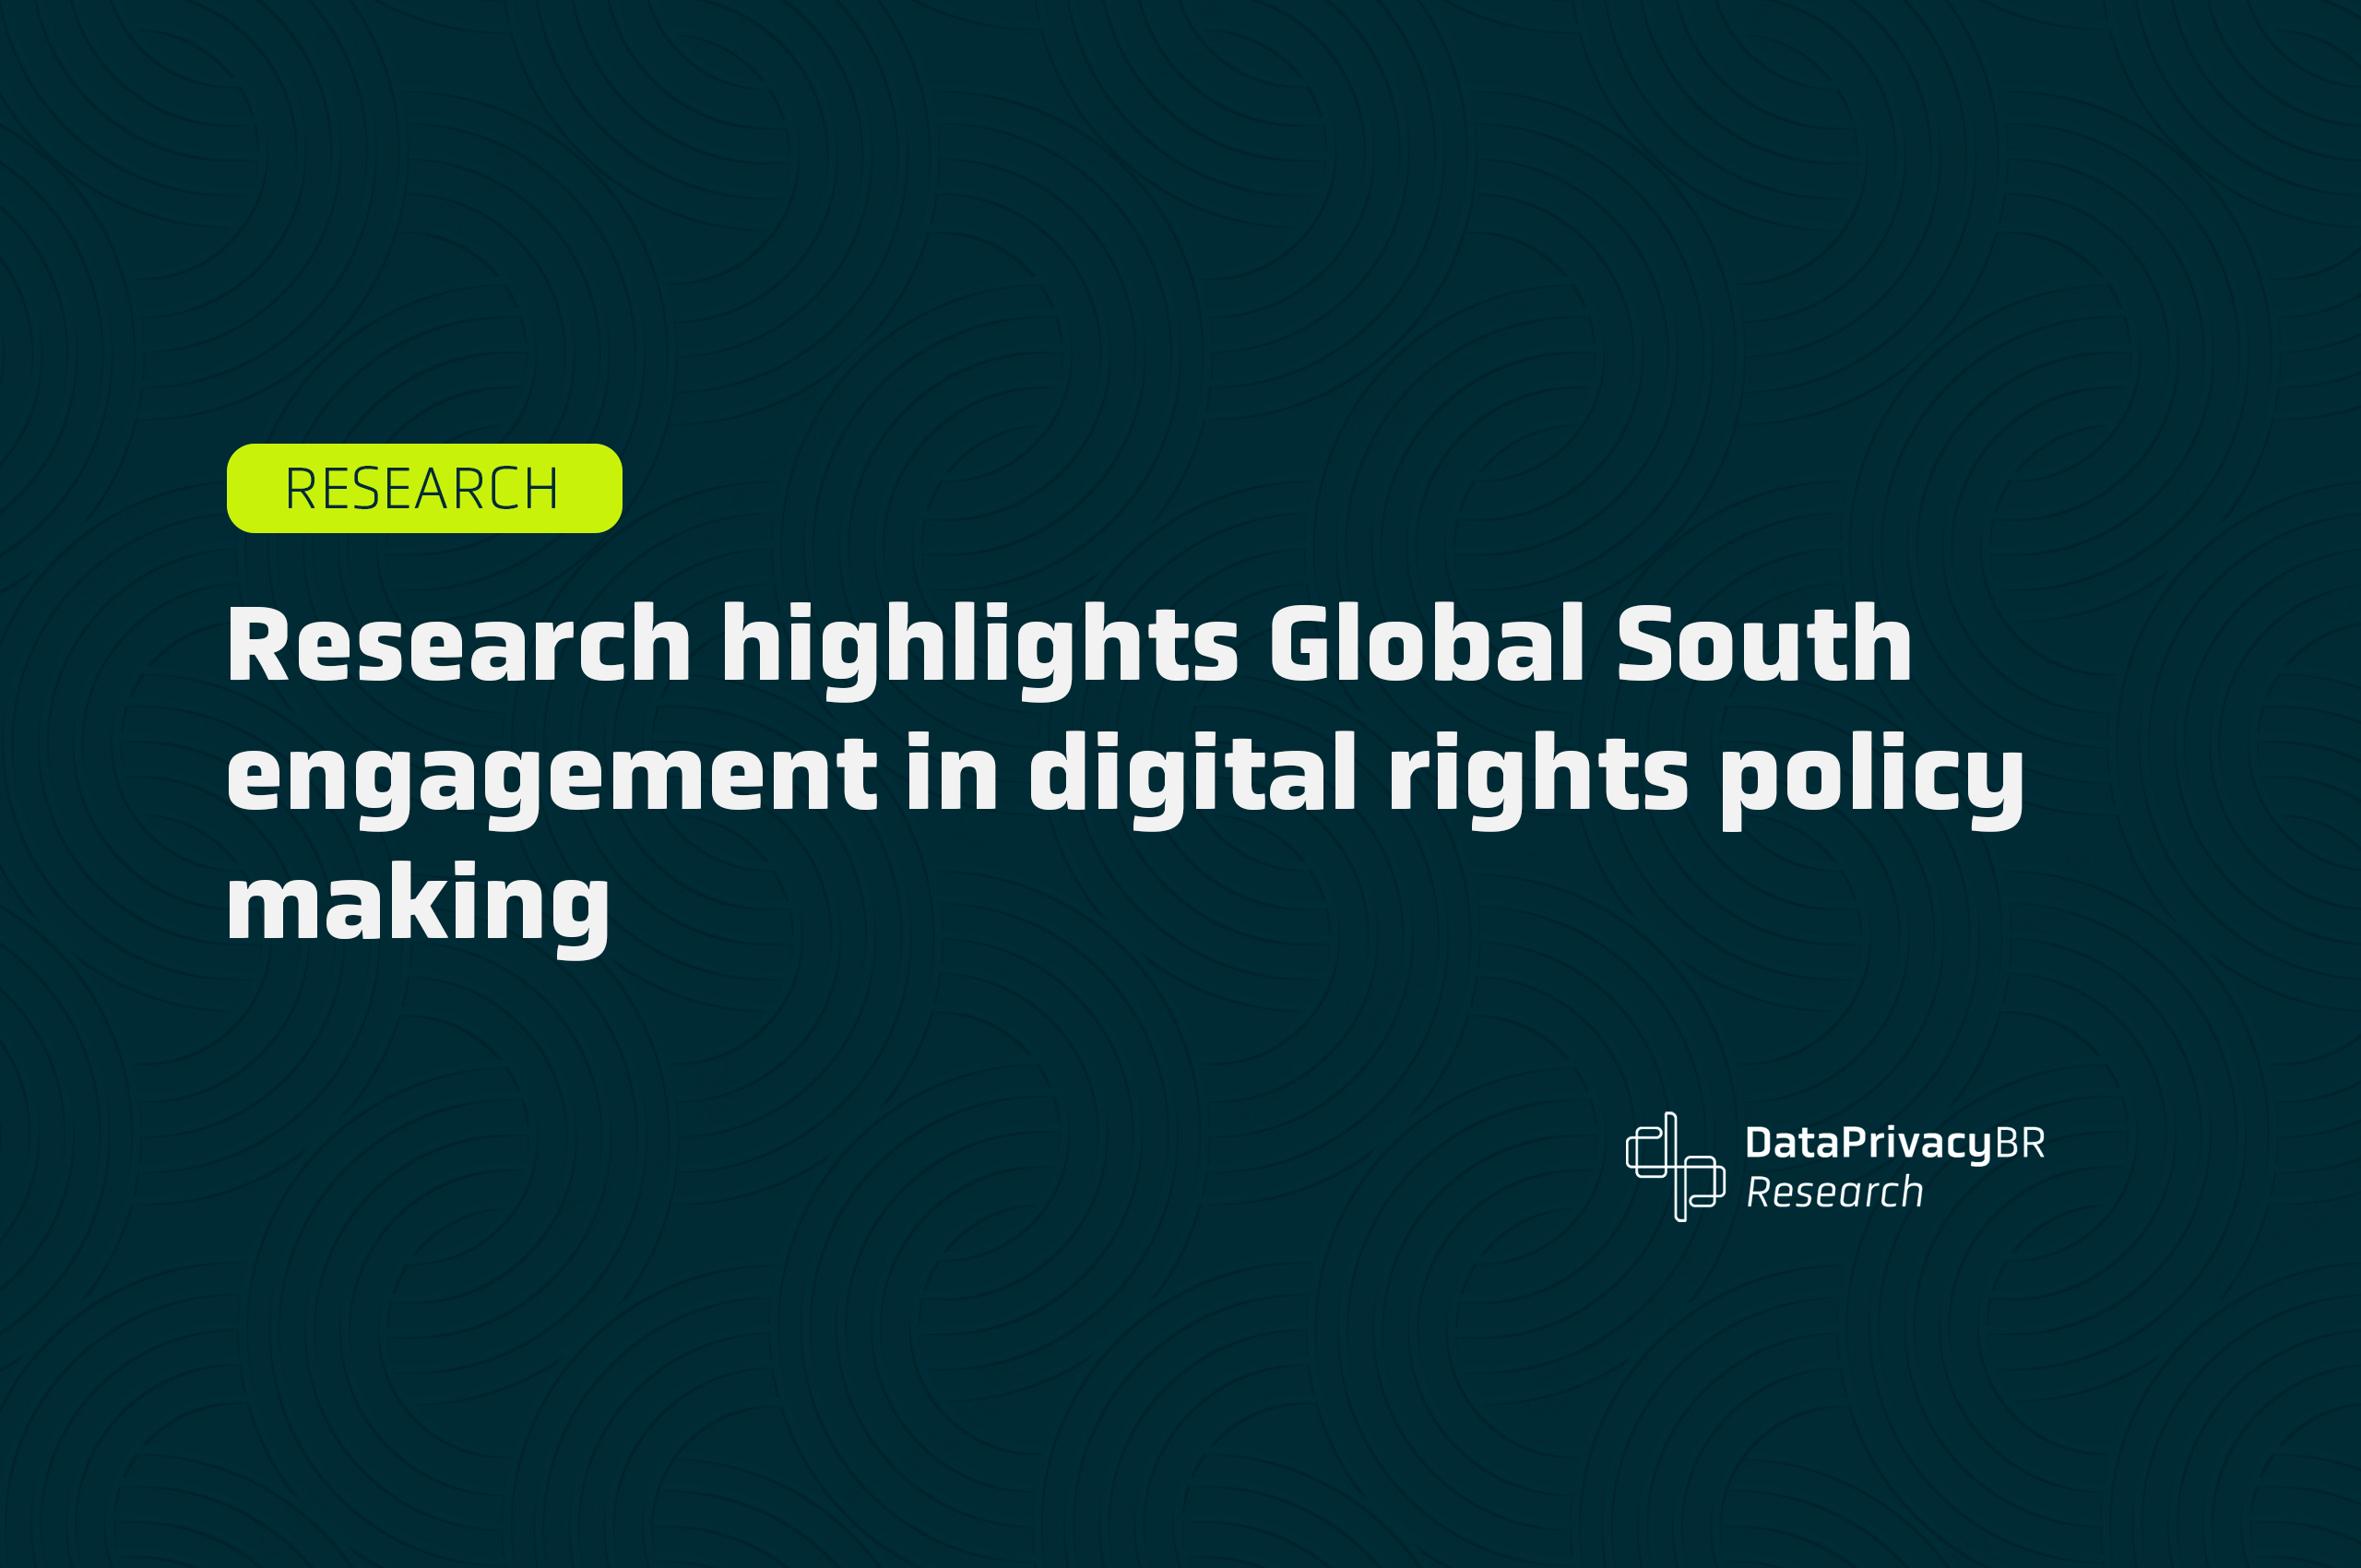 Research highlights Global South engagement in digital rights policy making